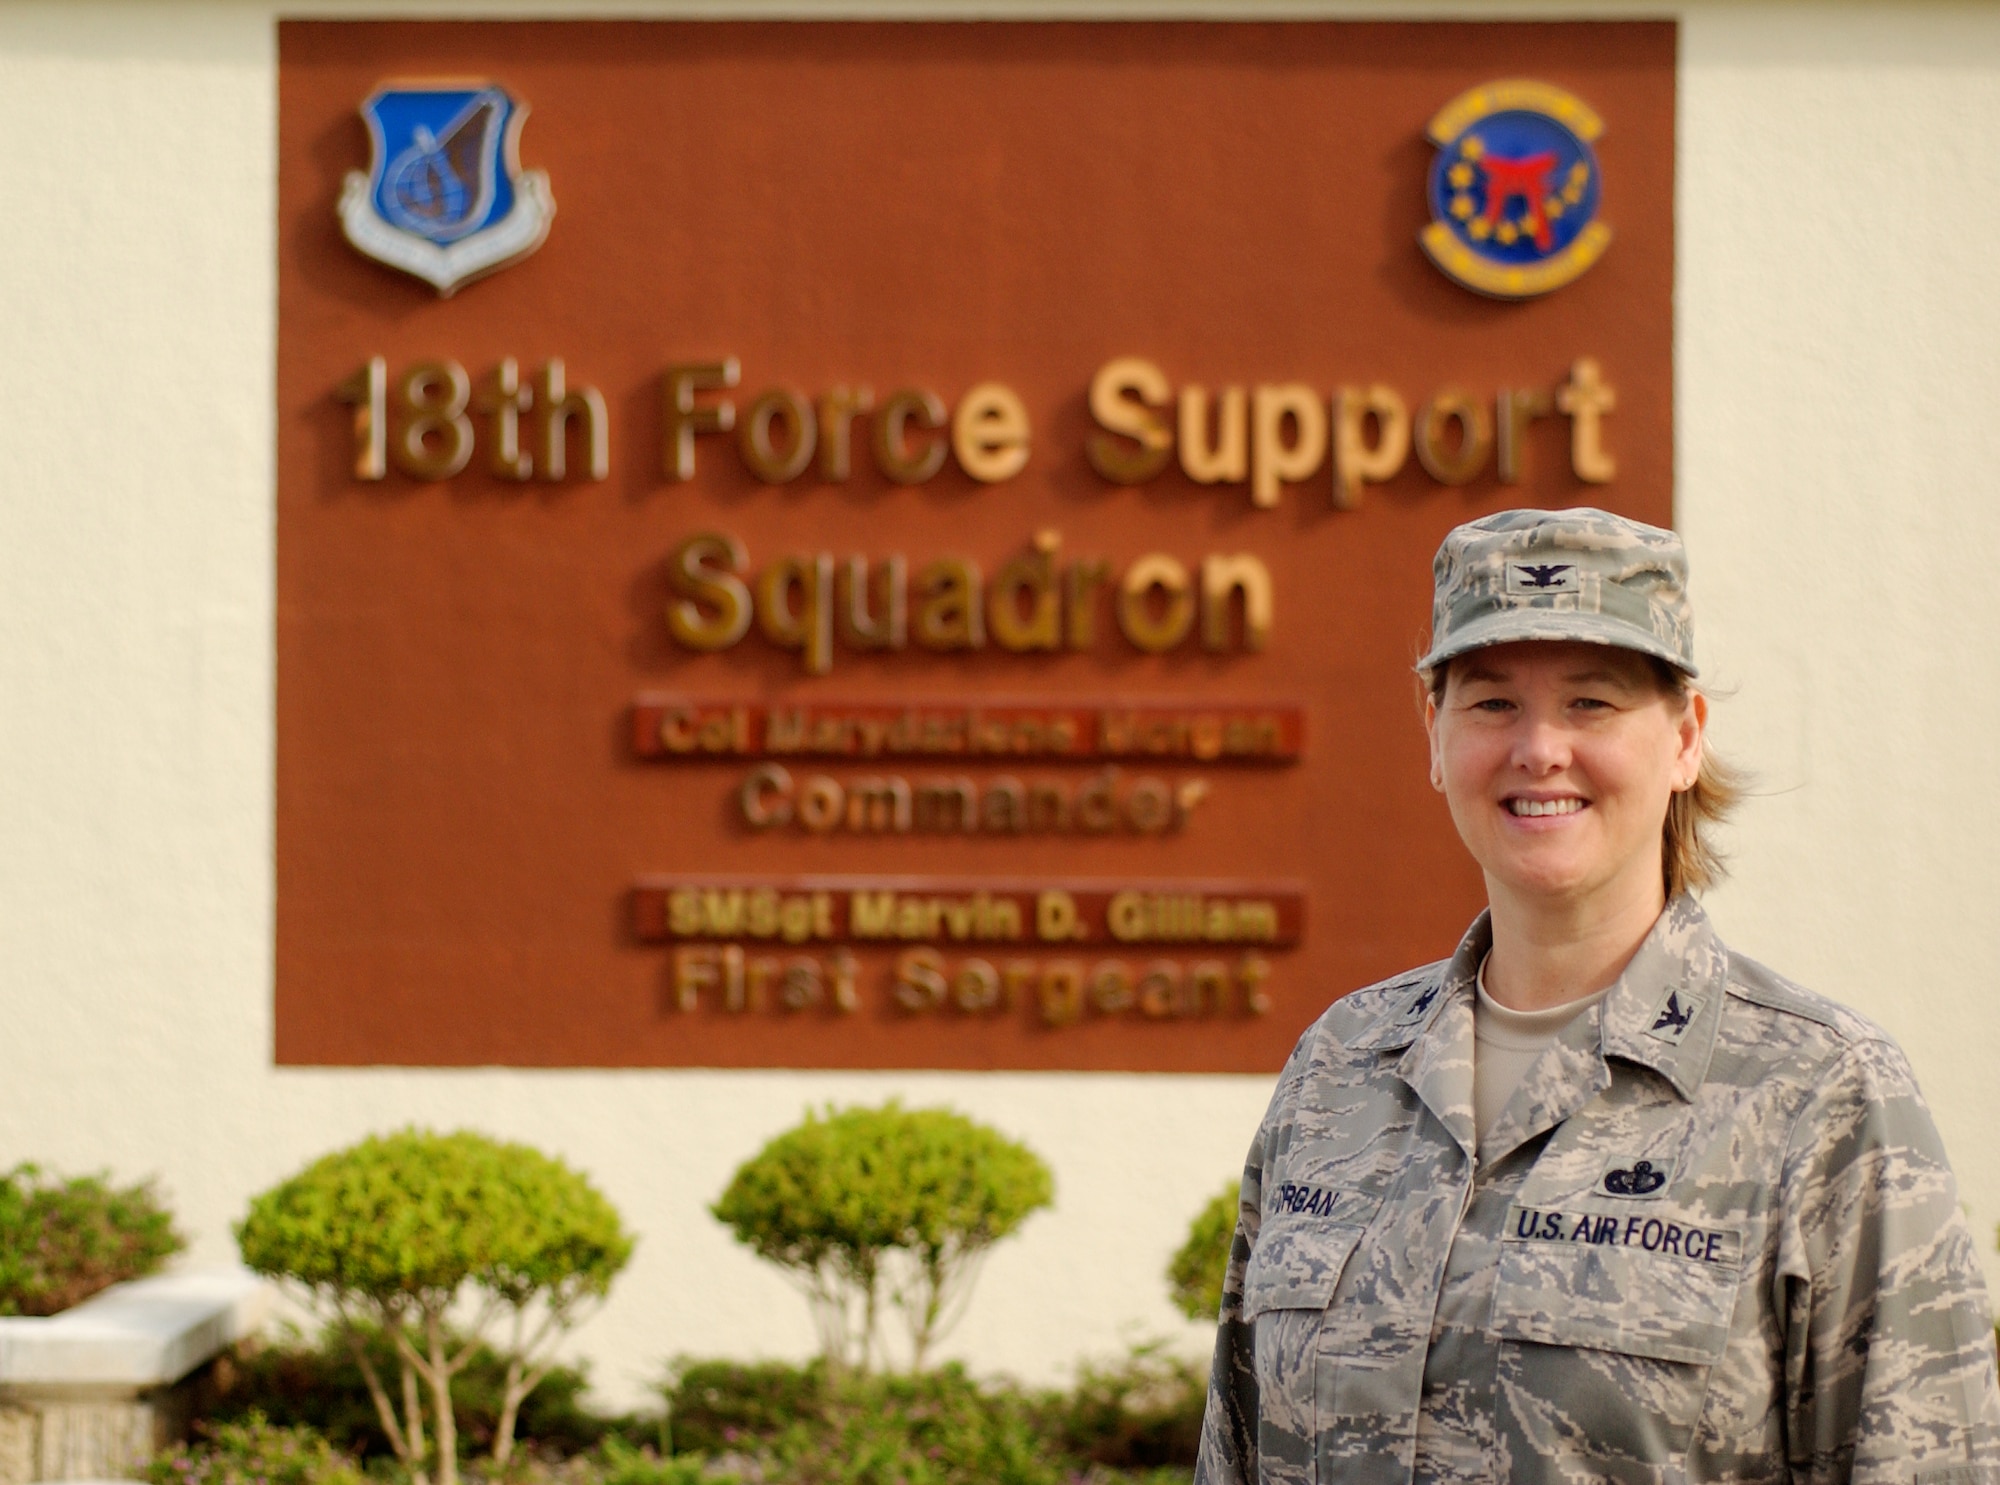 Col. MaryDarlene Morgan, 18th Force Support Squadron commander, takes command of more than 2,000 personnel as the 18th Services Squadron and the 18th Mission Support Squadron merge on May 29 at Kadena Air Base, Japan. 
(U.S. Air Force photo/Tech. Sgt. Rey Ramon)